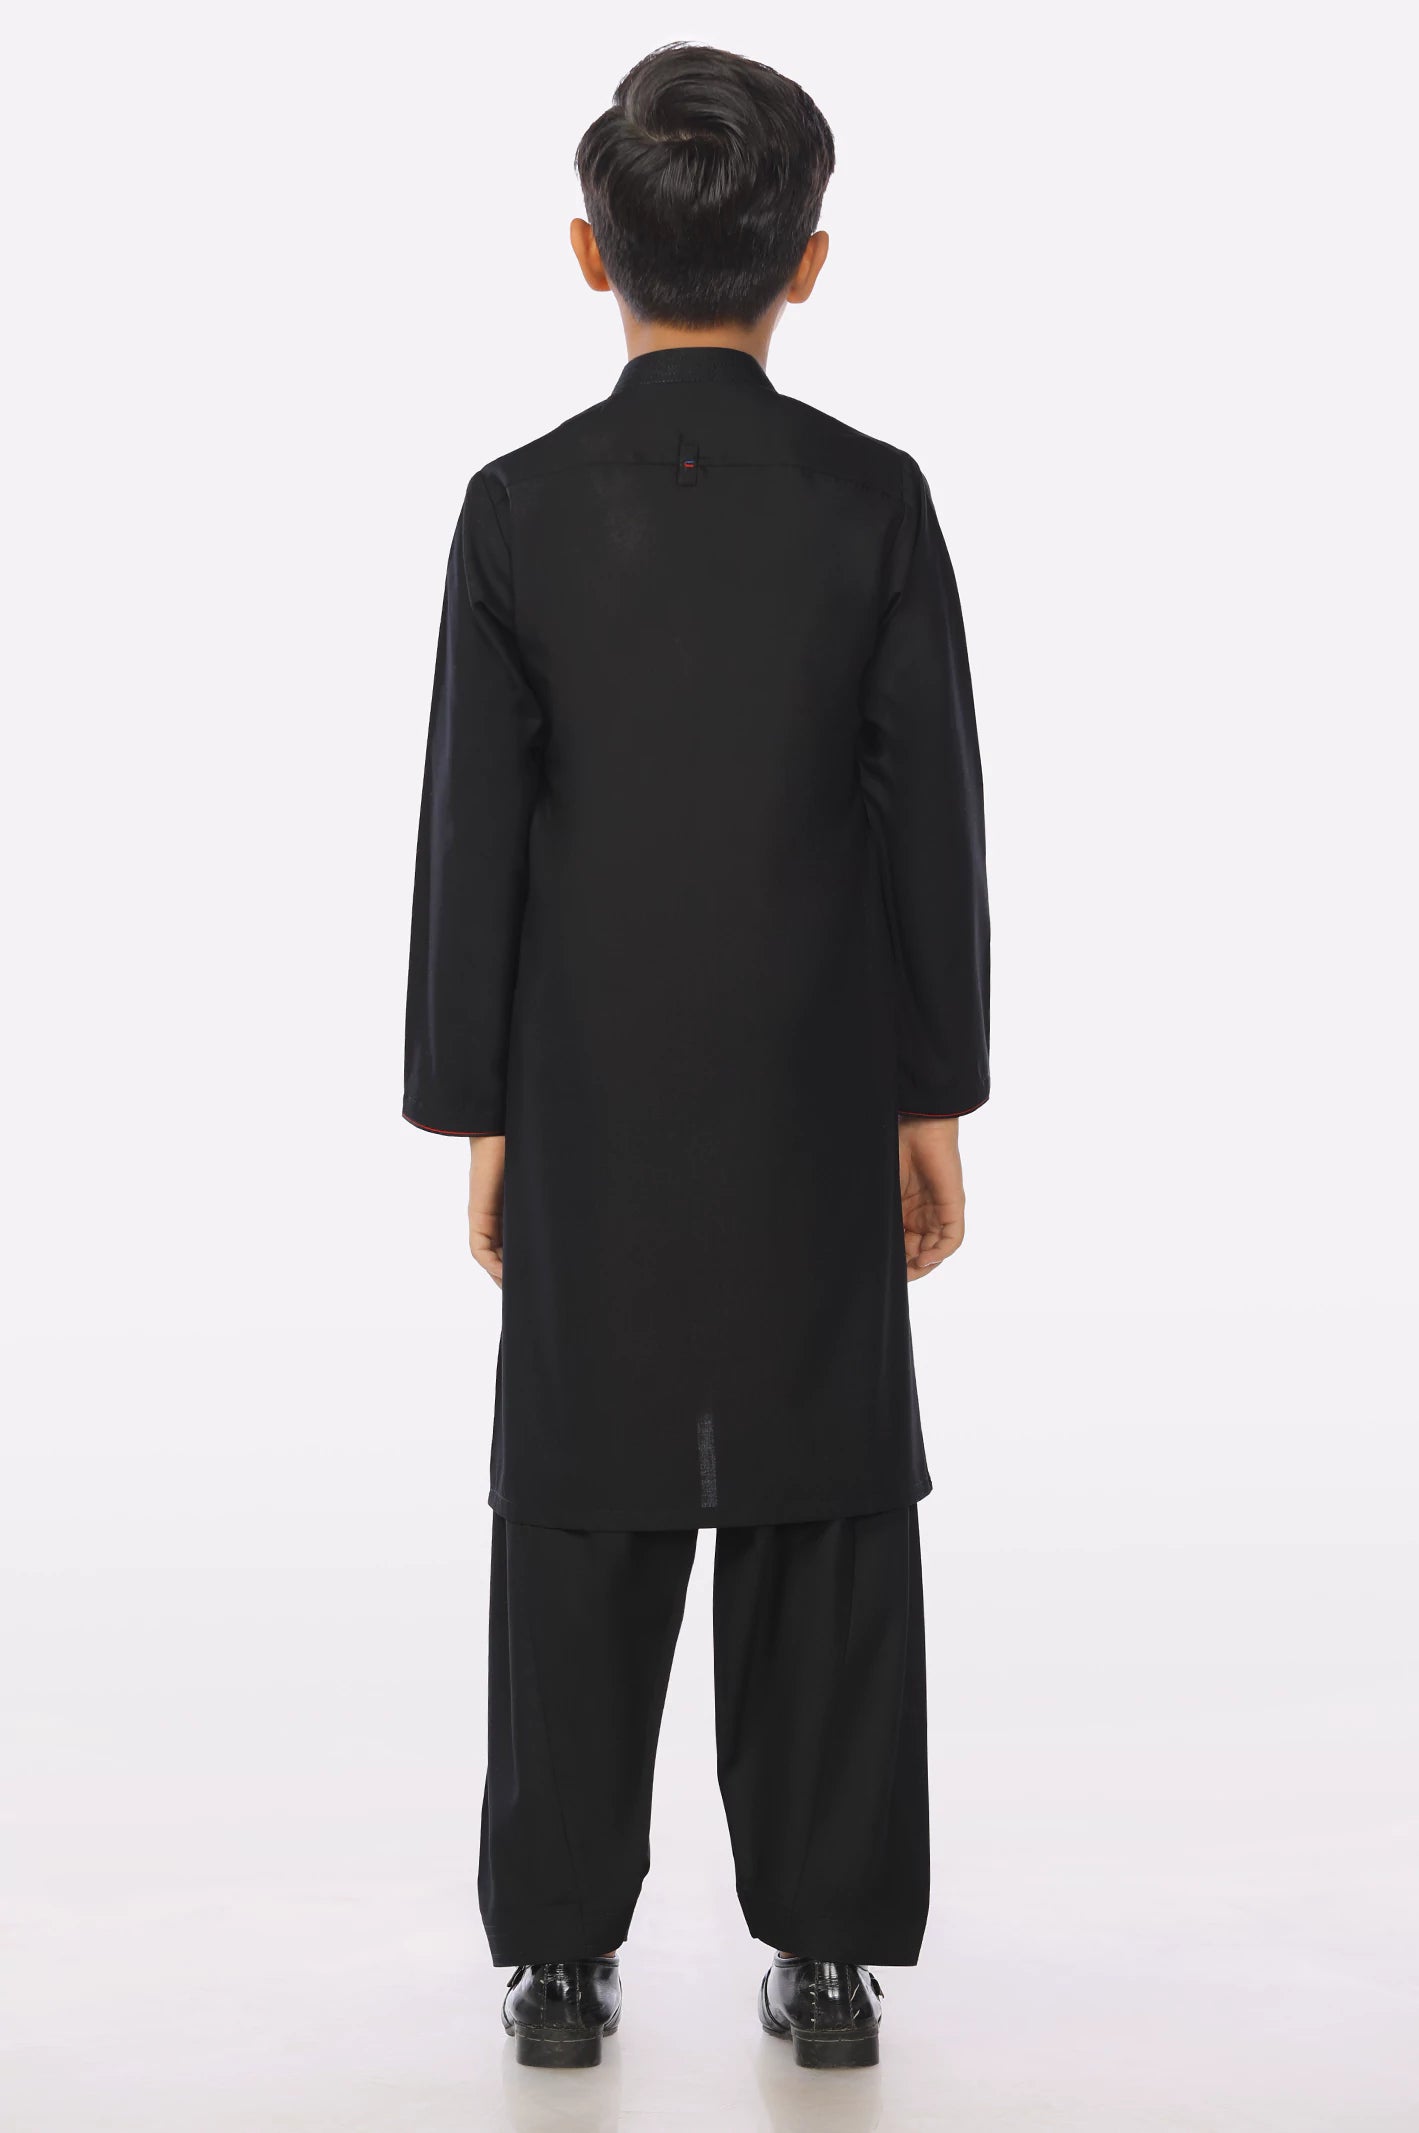 Black Boys Shalwar Suit From Diners